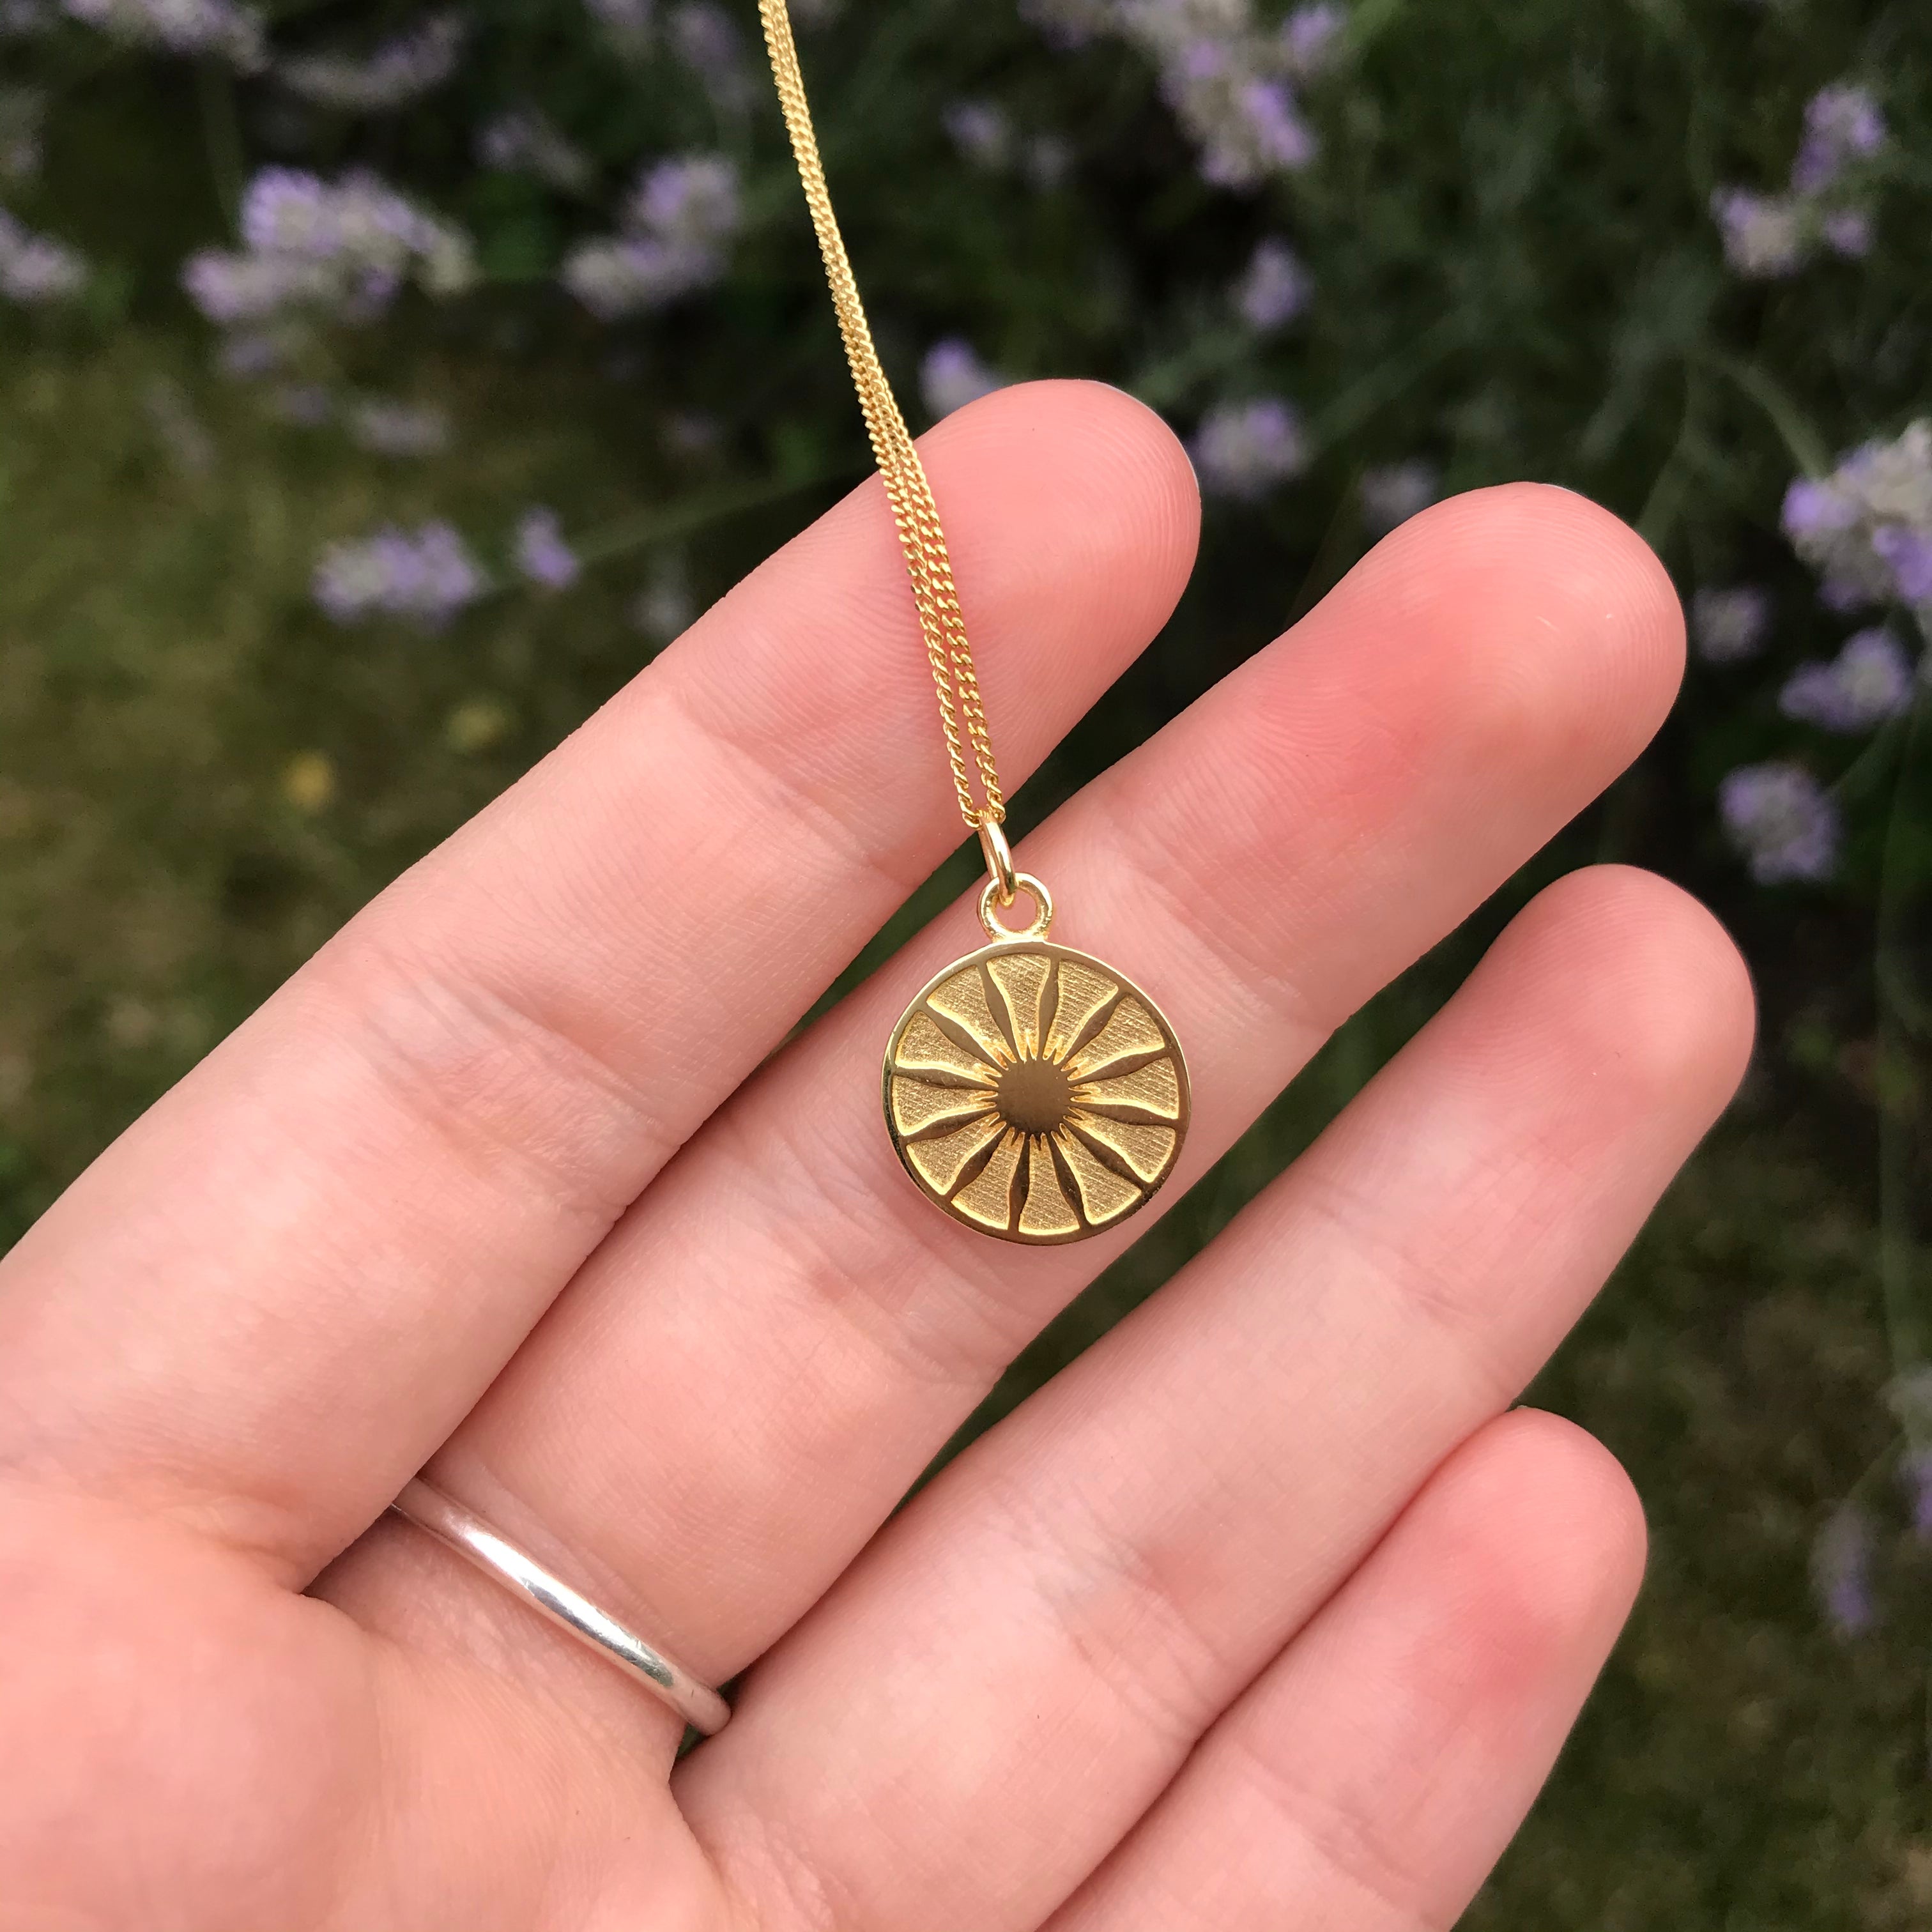 Marguerite daisy necklace in gold vermeil on hand 